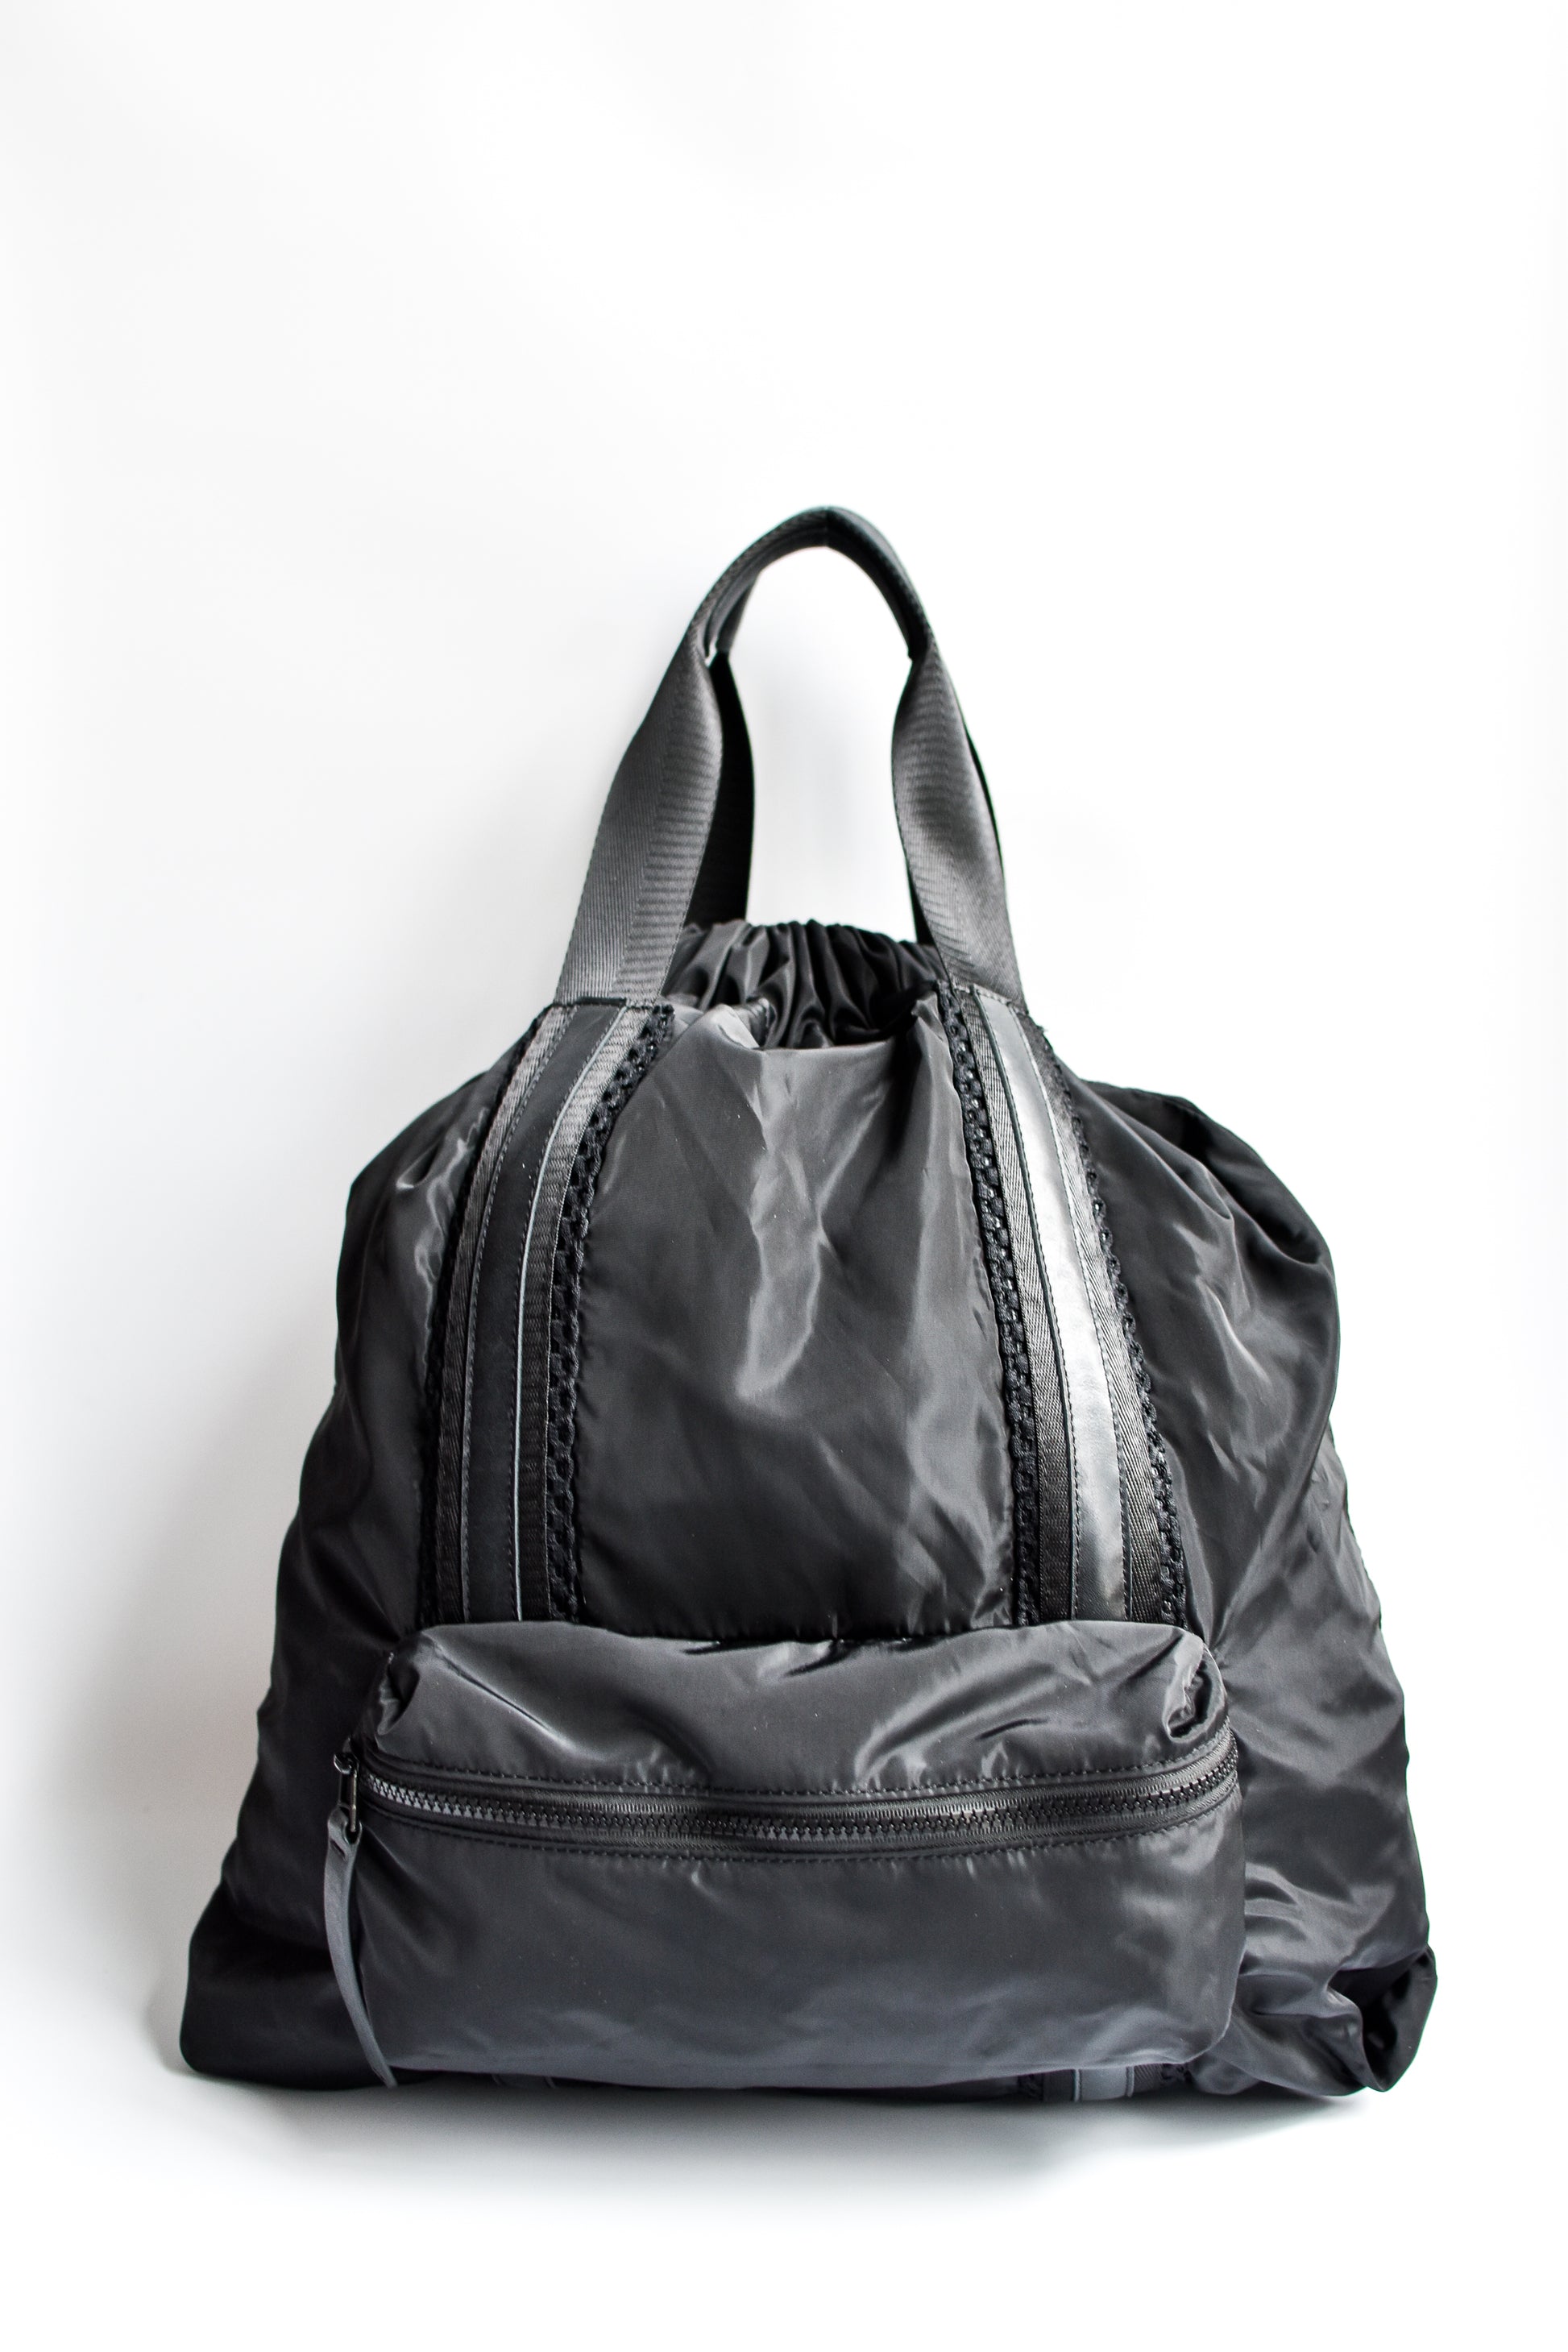 Black nylon convertible backpack tote with leather details.